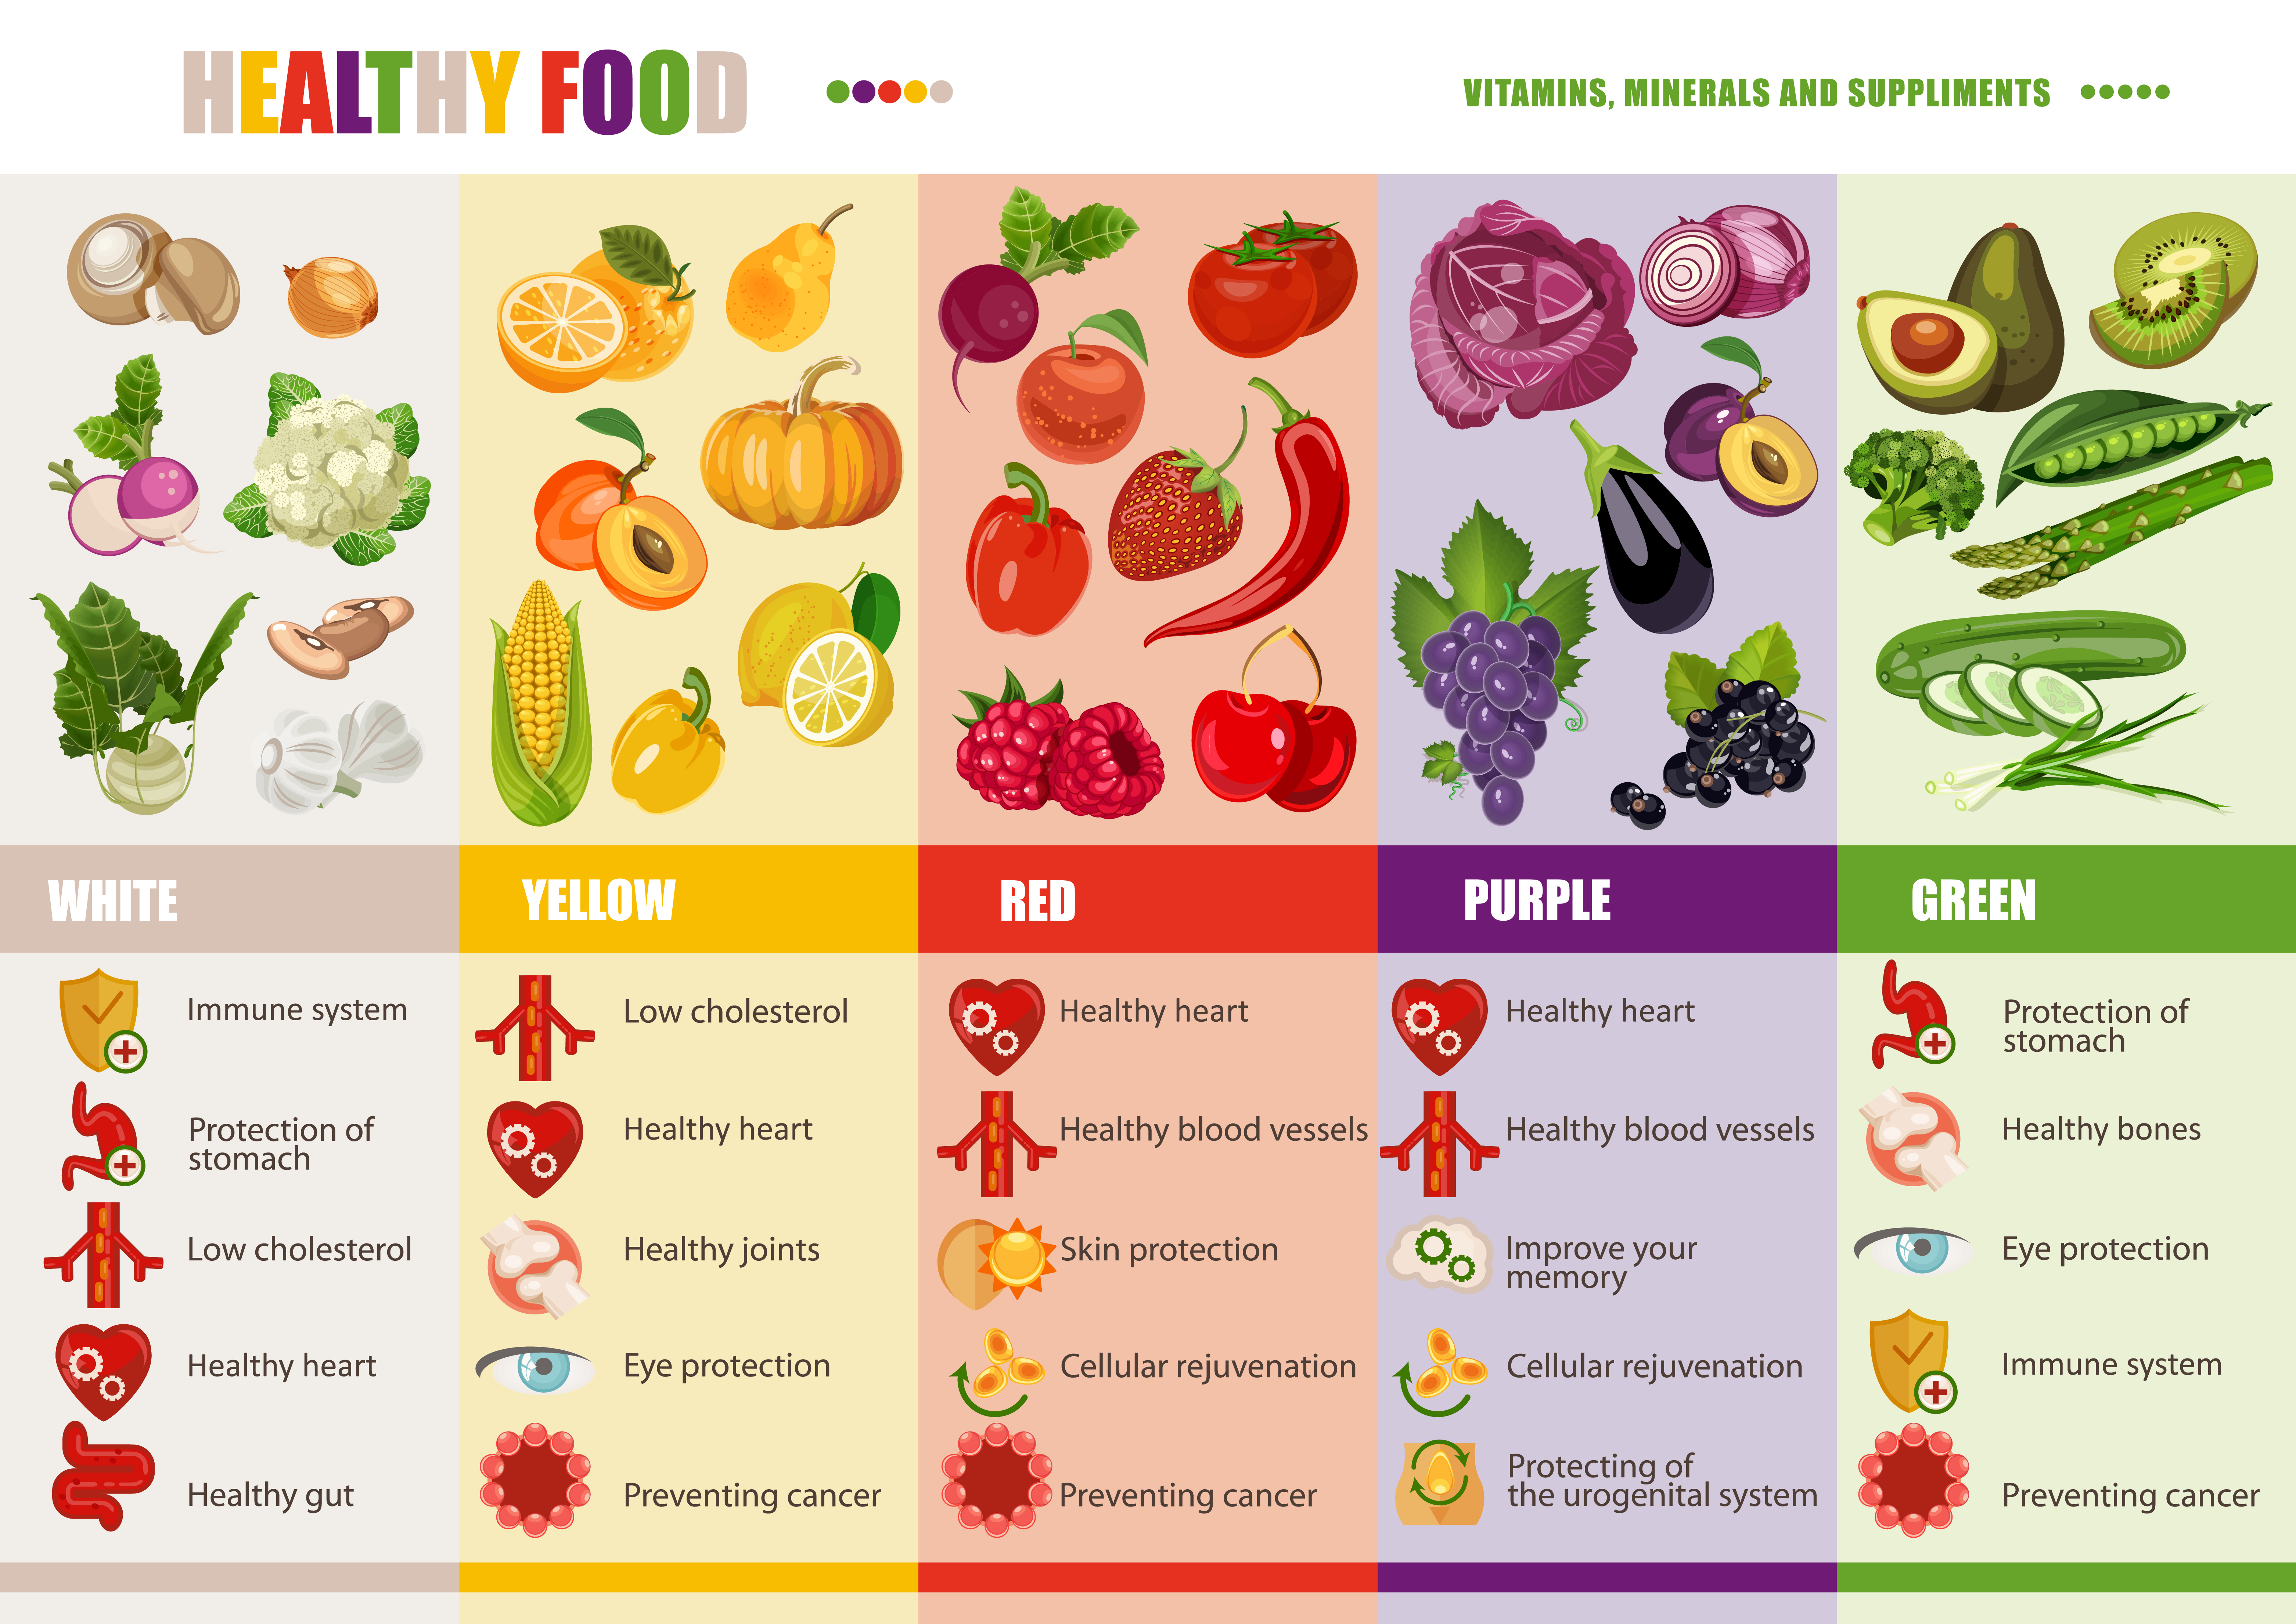 Diet cheatsheet! Remember to include a lot of colorful vegetables in your diet!